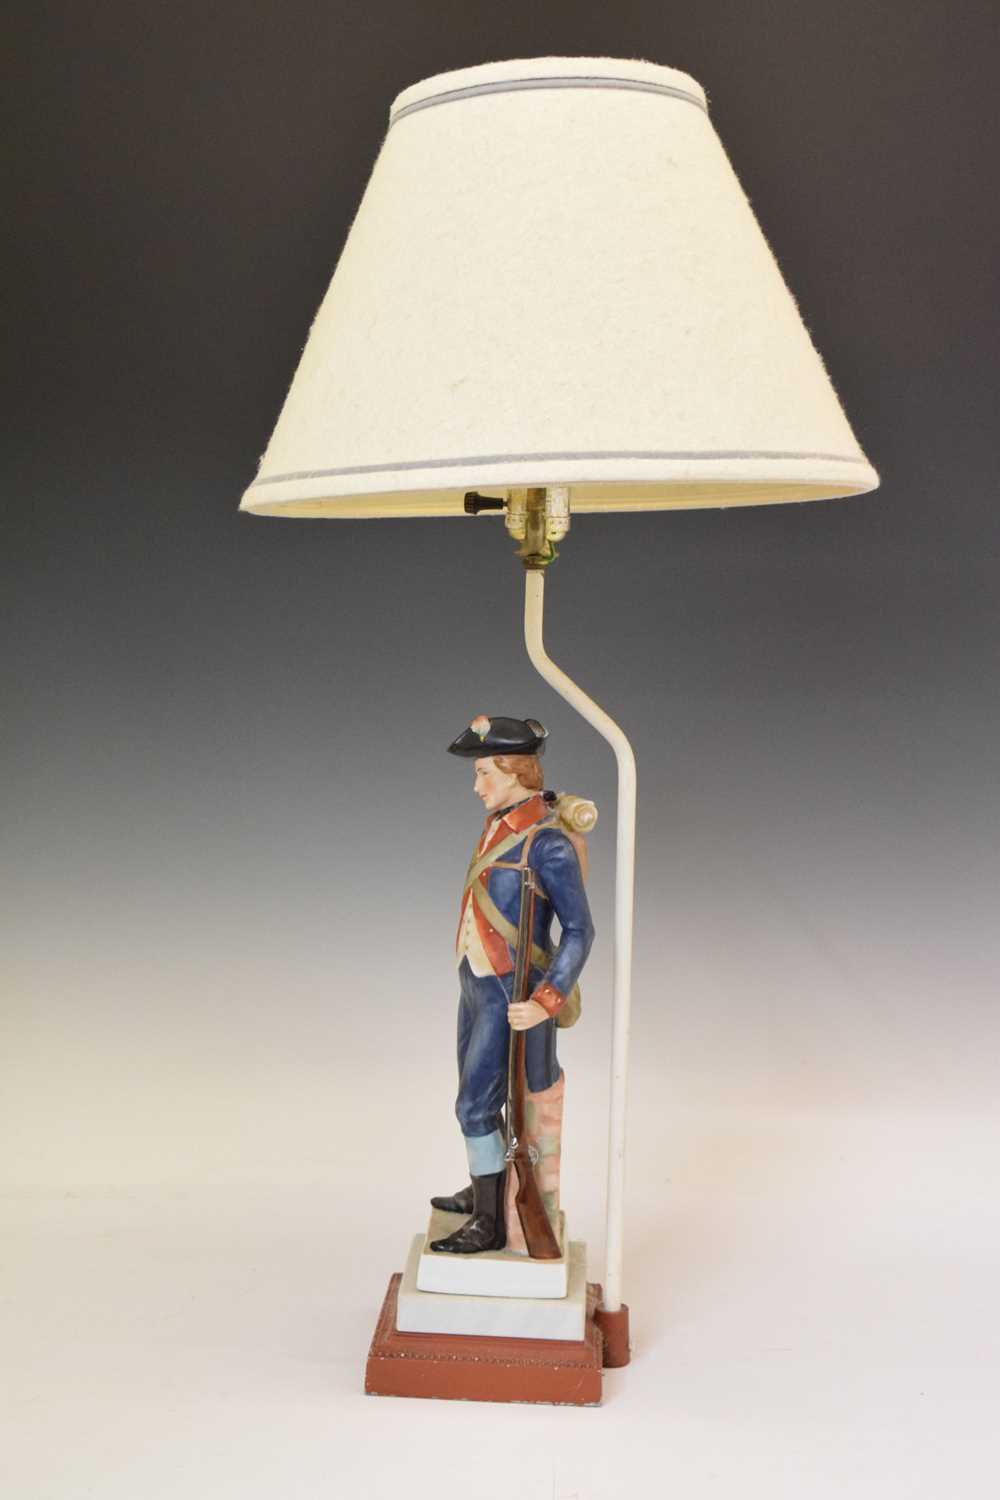 Capodimonte style figural table lamp - Image 5 of 8